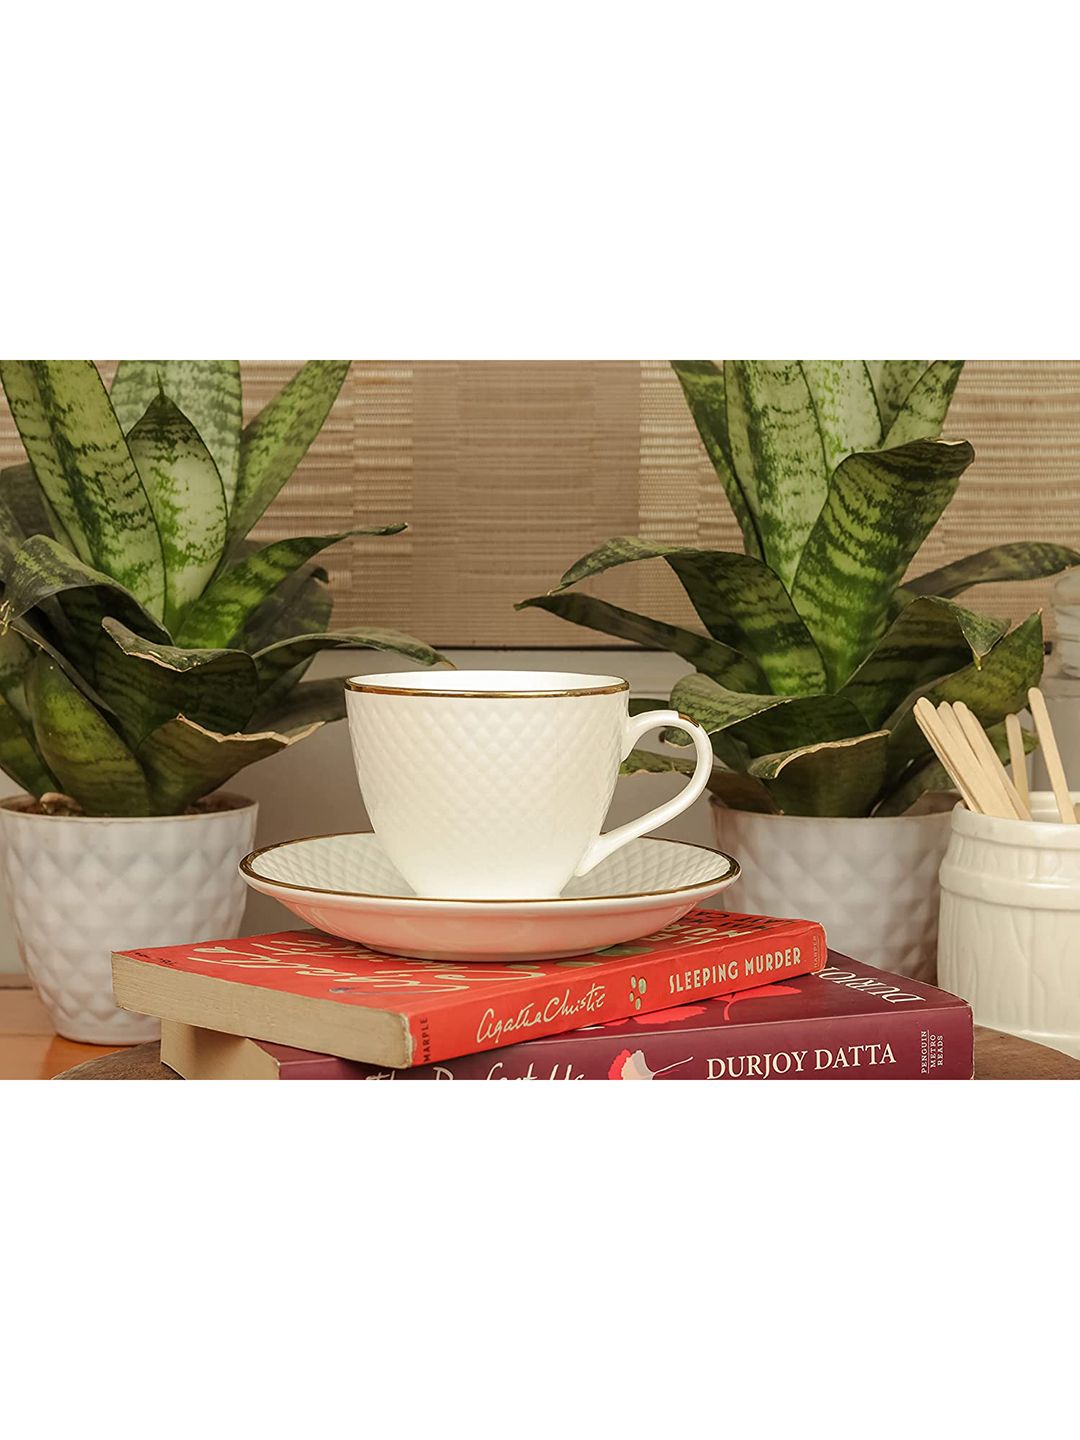 Femora White Set of 6 Textured Ceramic Glossy Cups and Saucers Set Price in India